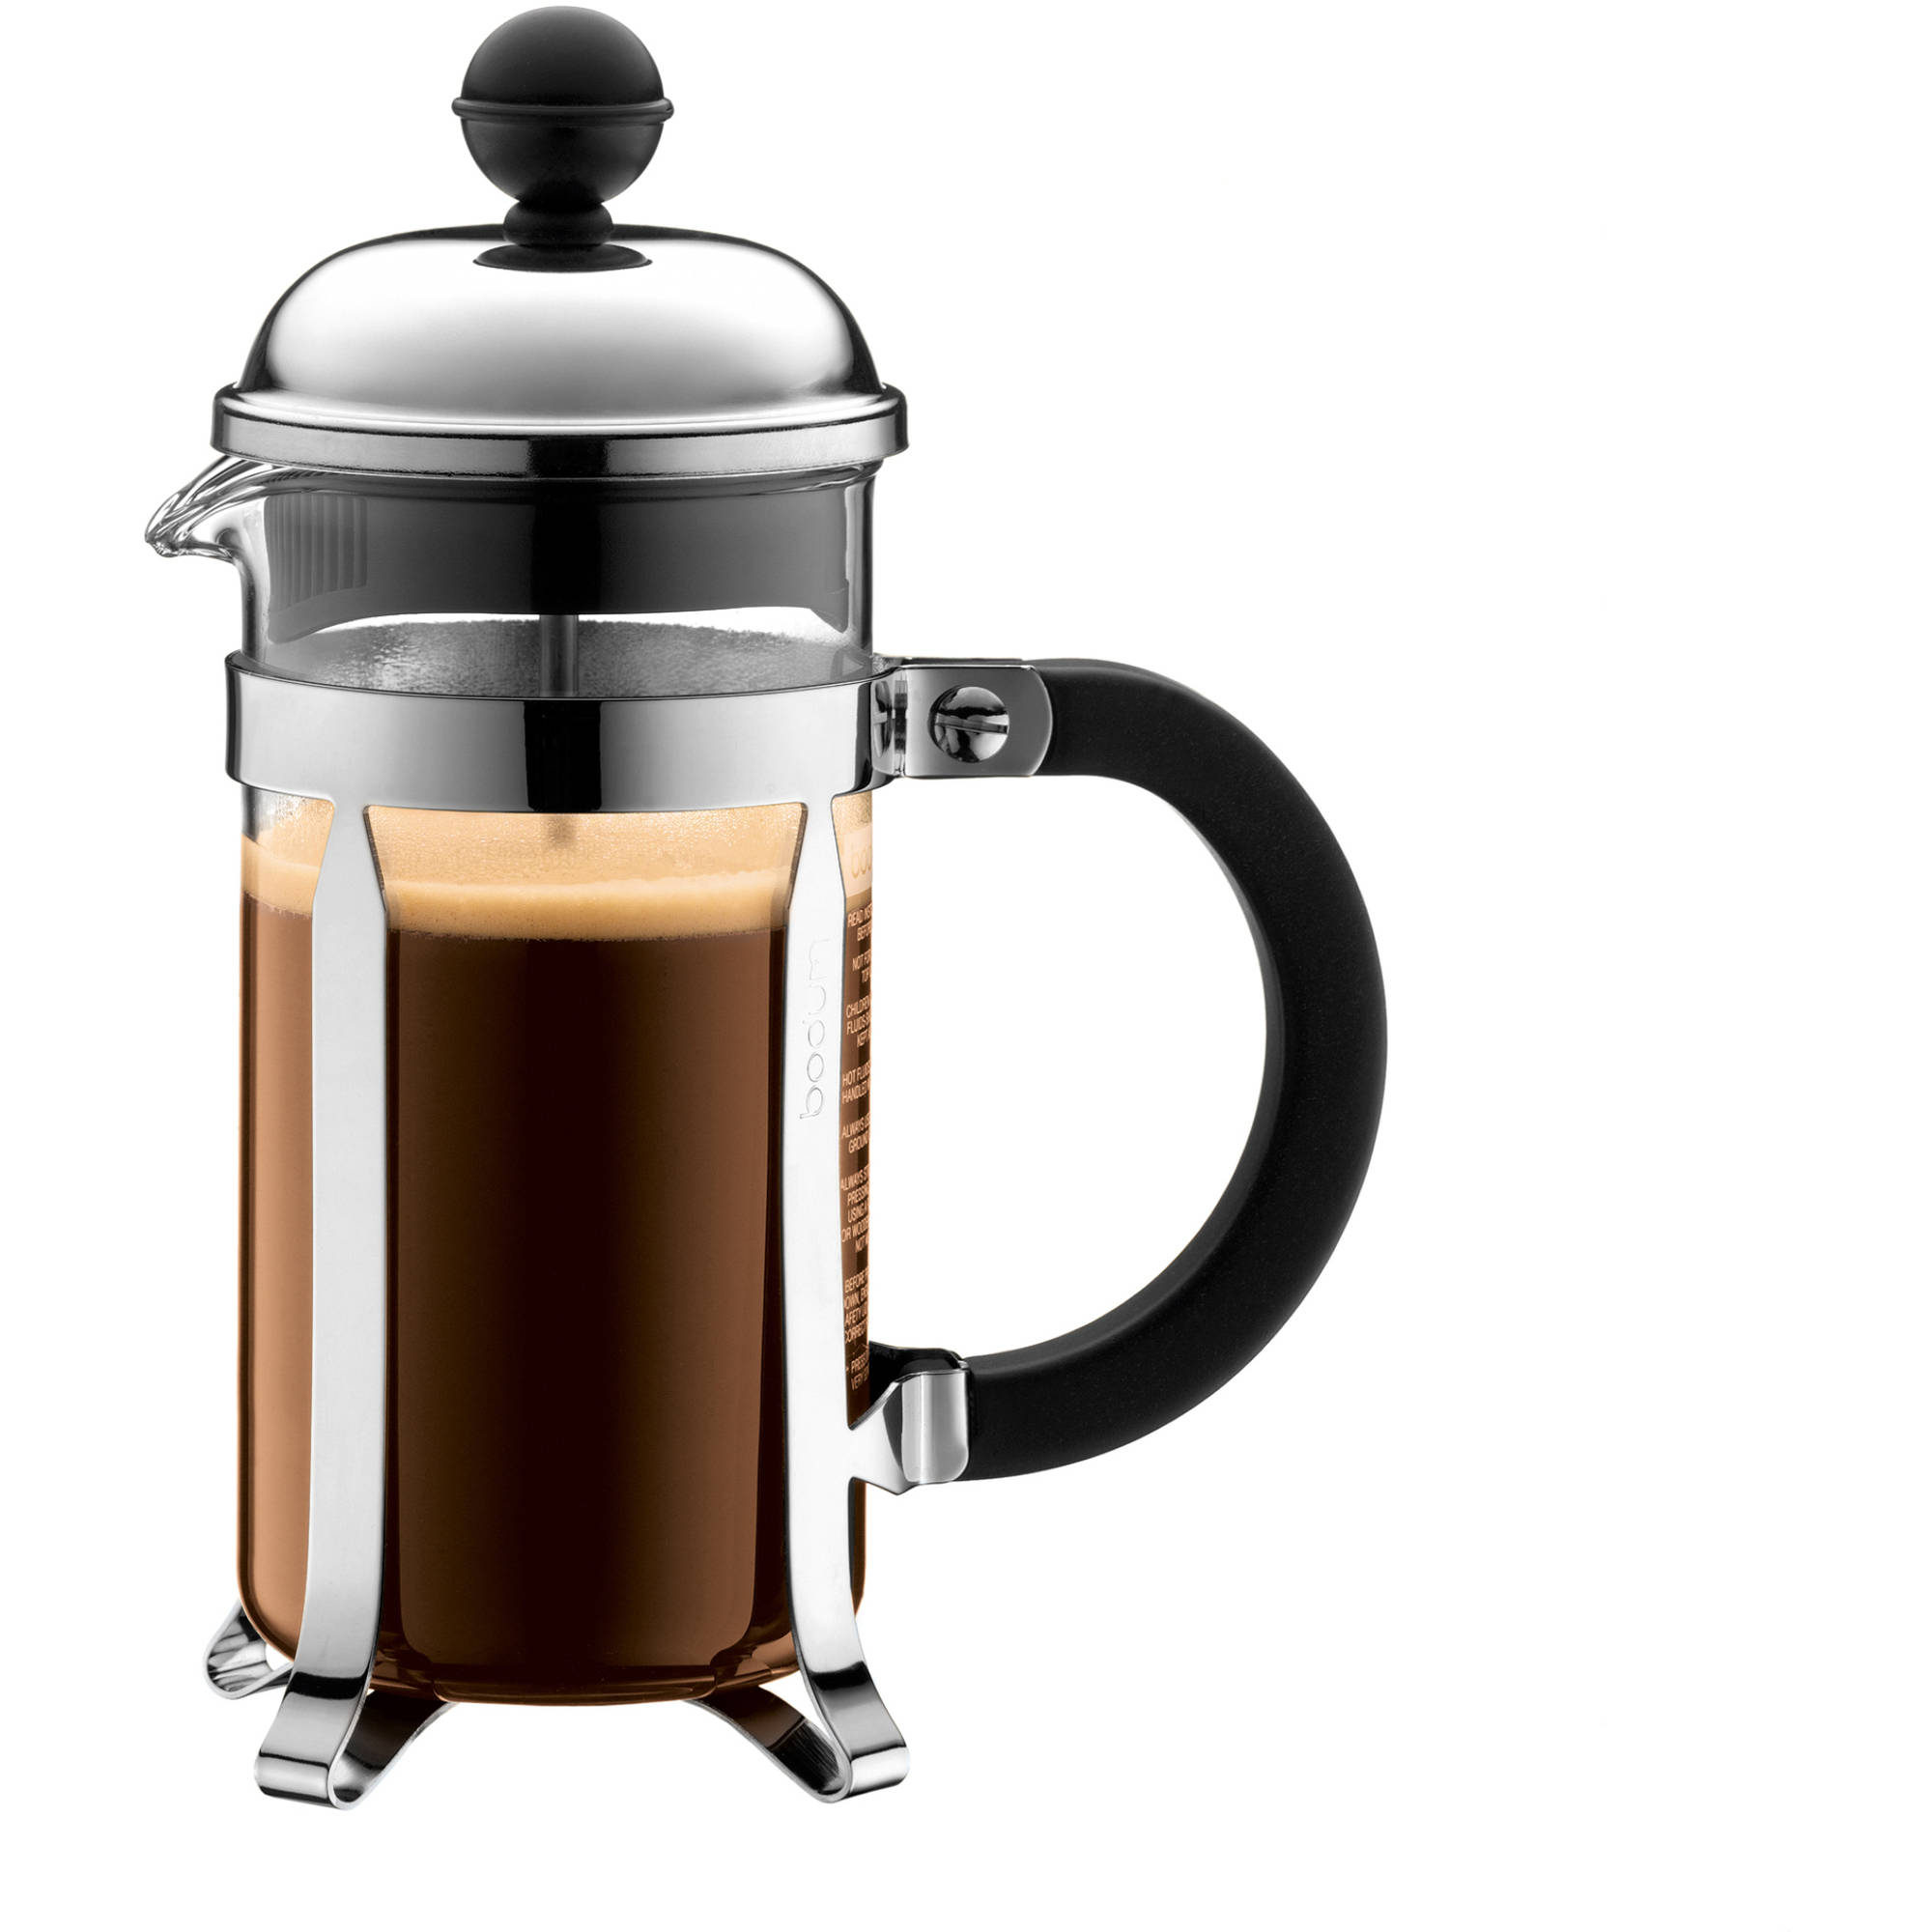 BODUM Chambord French Press Coffee Maker, 12 Ounce, Stainless Steel - image 1 of 7